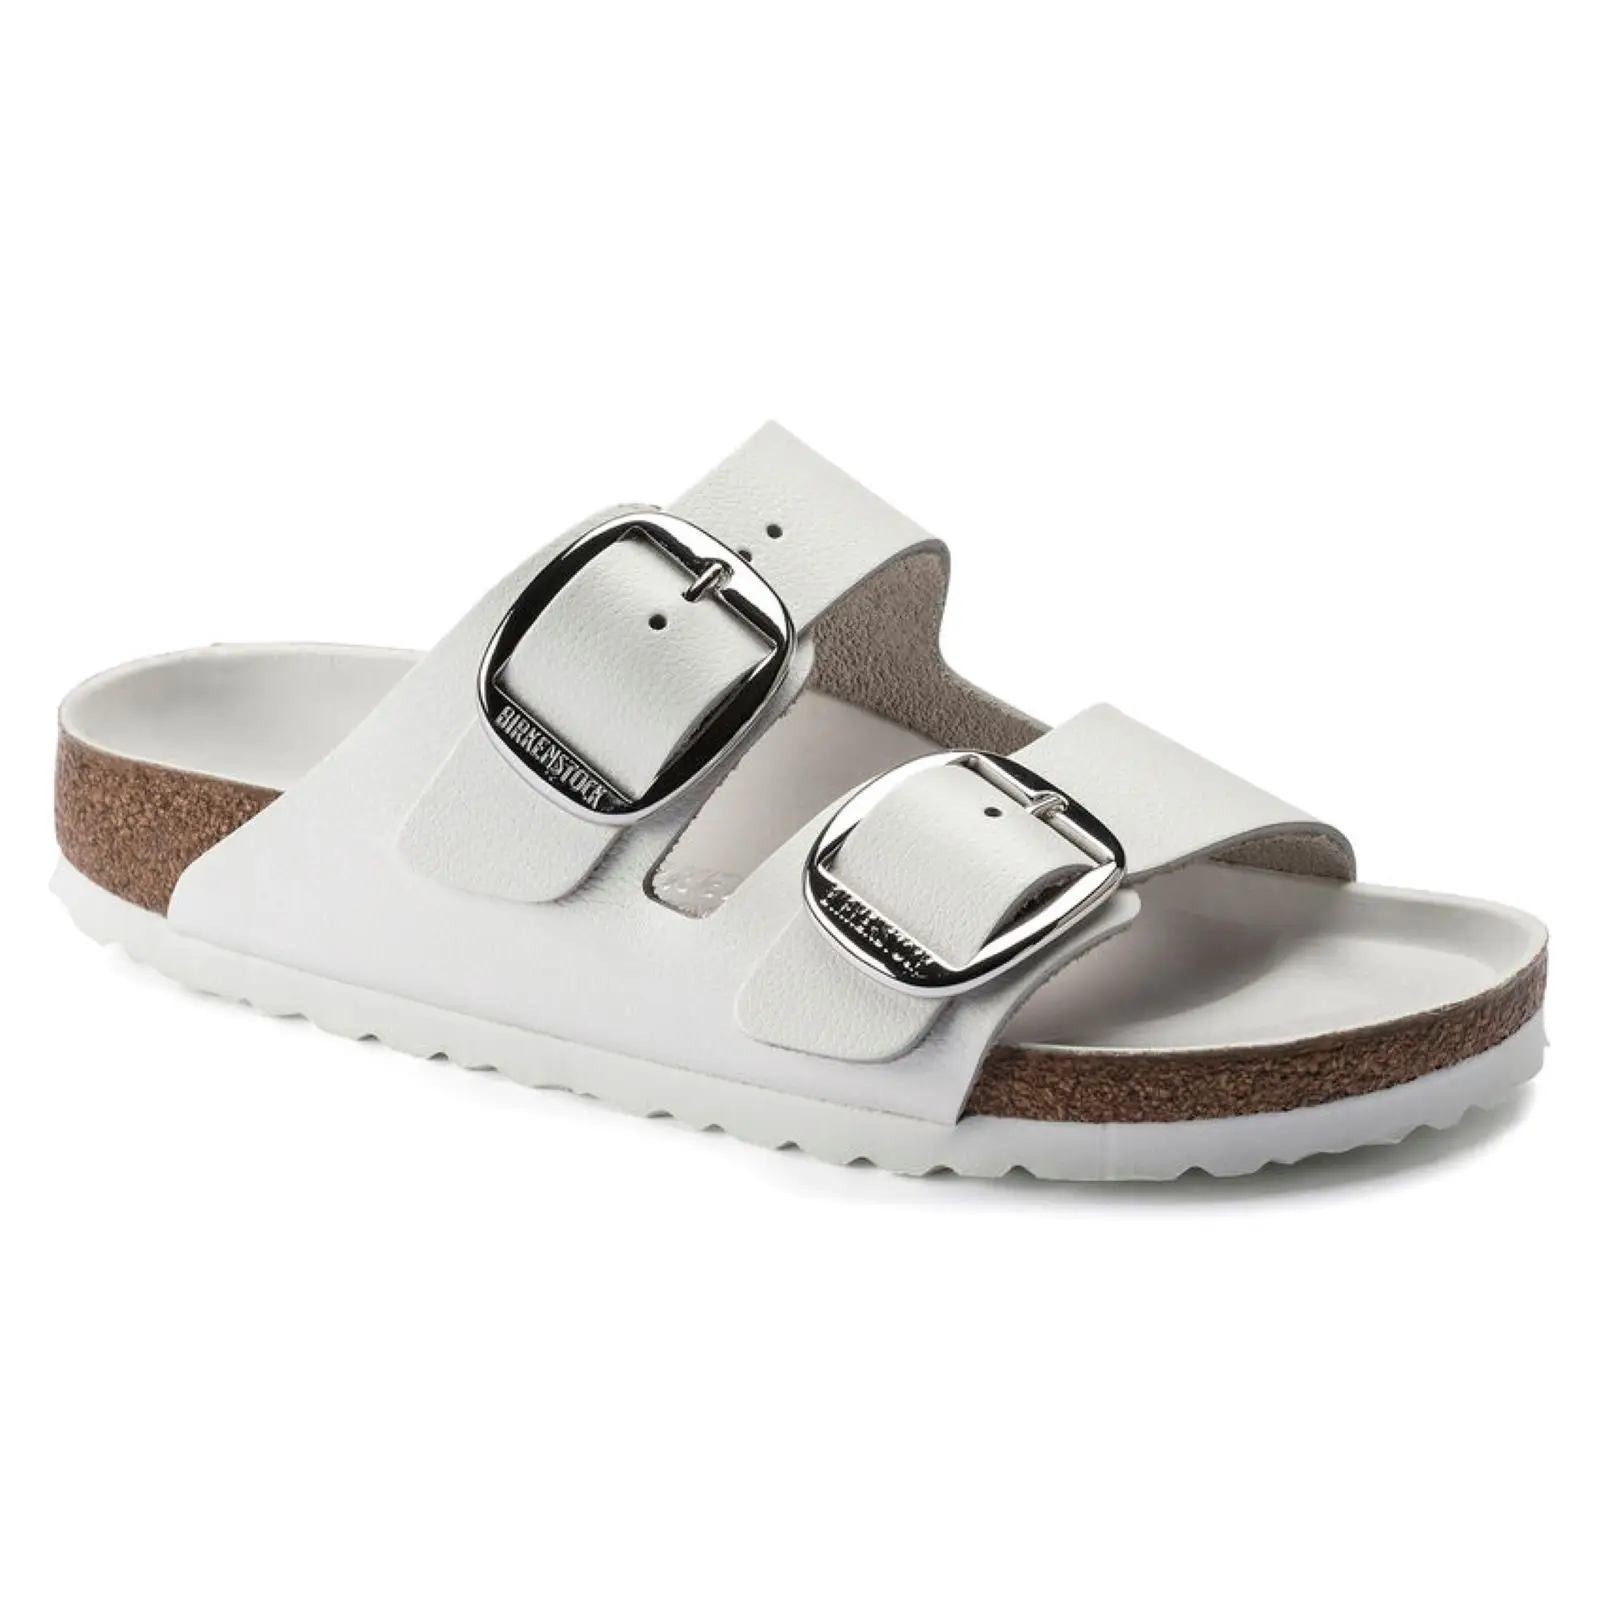 Read more about the article Staying Fashion Fresh: How to Maintain White Birkenstock Sandals